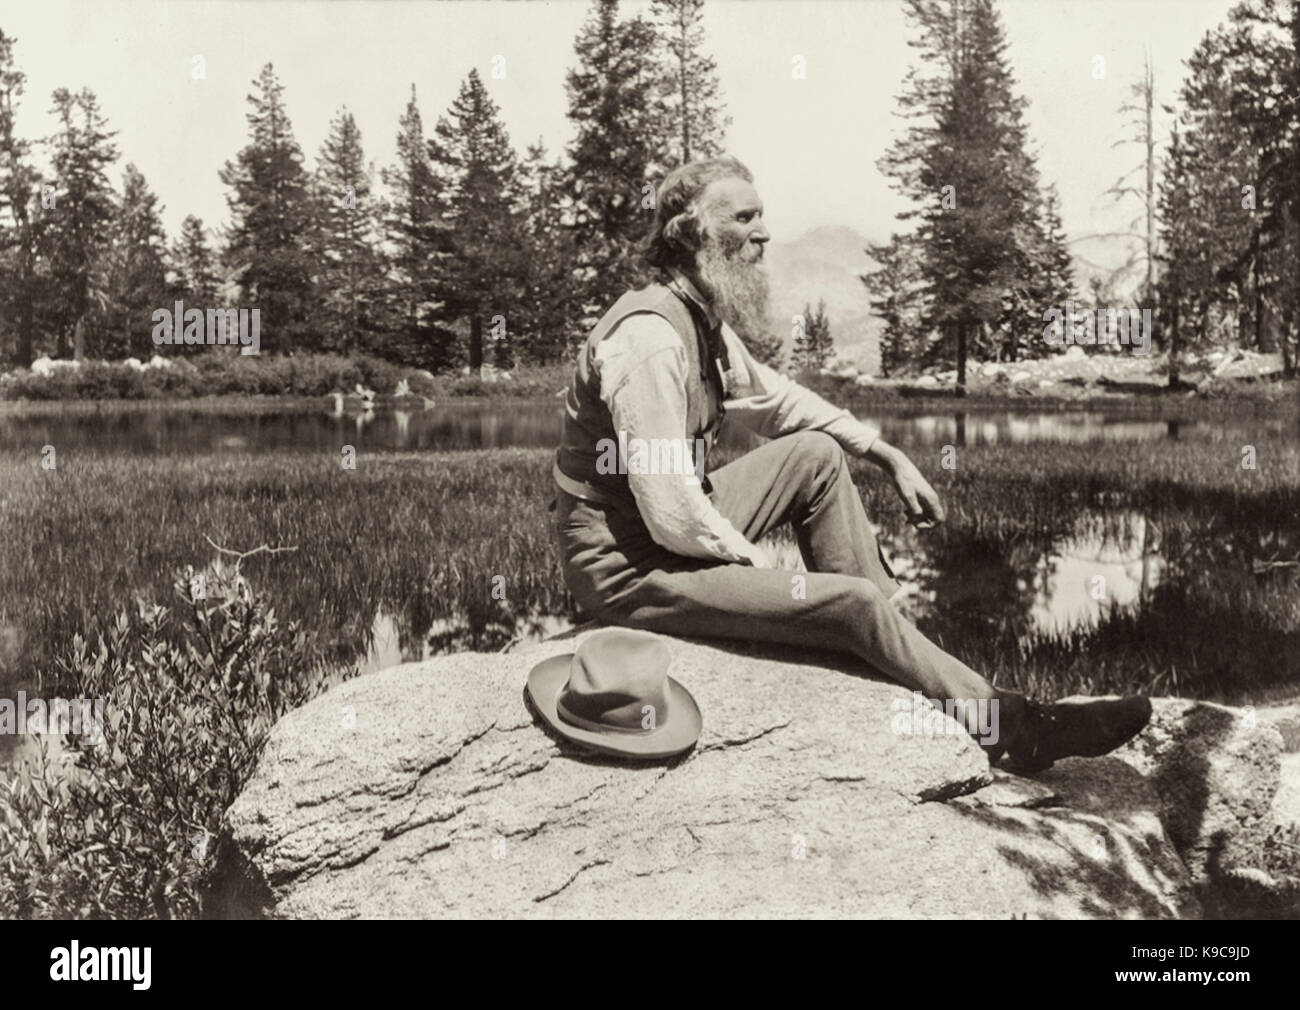 John Muir (1838-1914) naturalist whose passion for the preservation of wilderness areas in the United States conveyed through his writing helped establish Yosemite National Park and the US National Park Service. Photograph taken at Mirror Lake in Yosemite circa 1902. Stock Photo